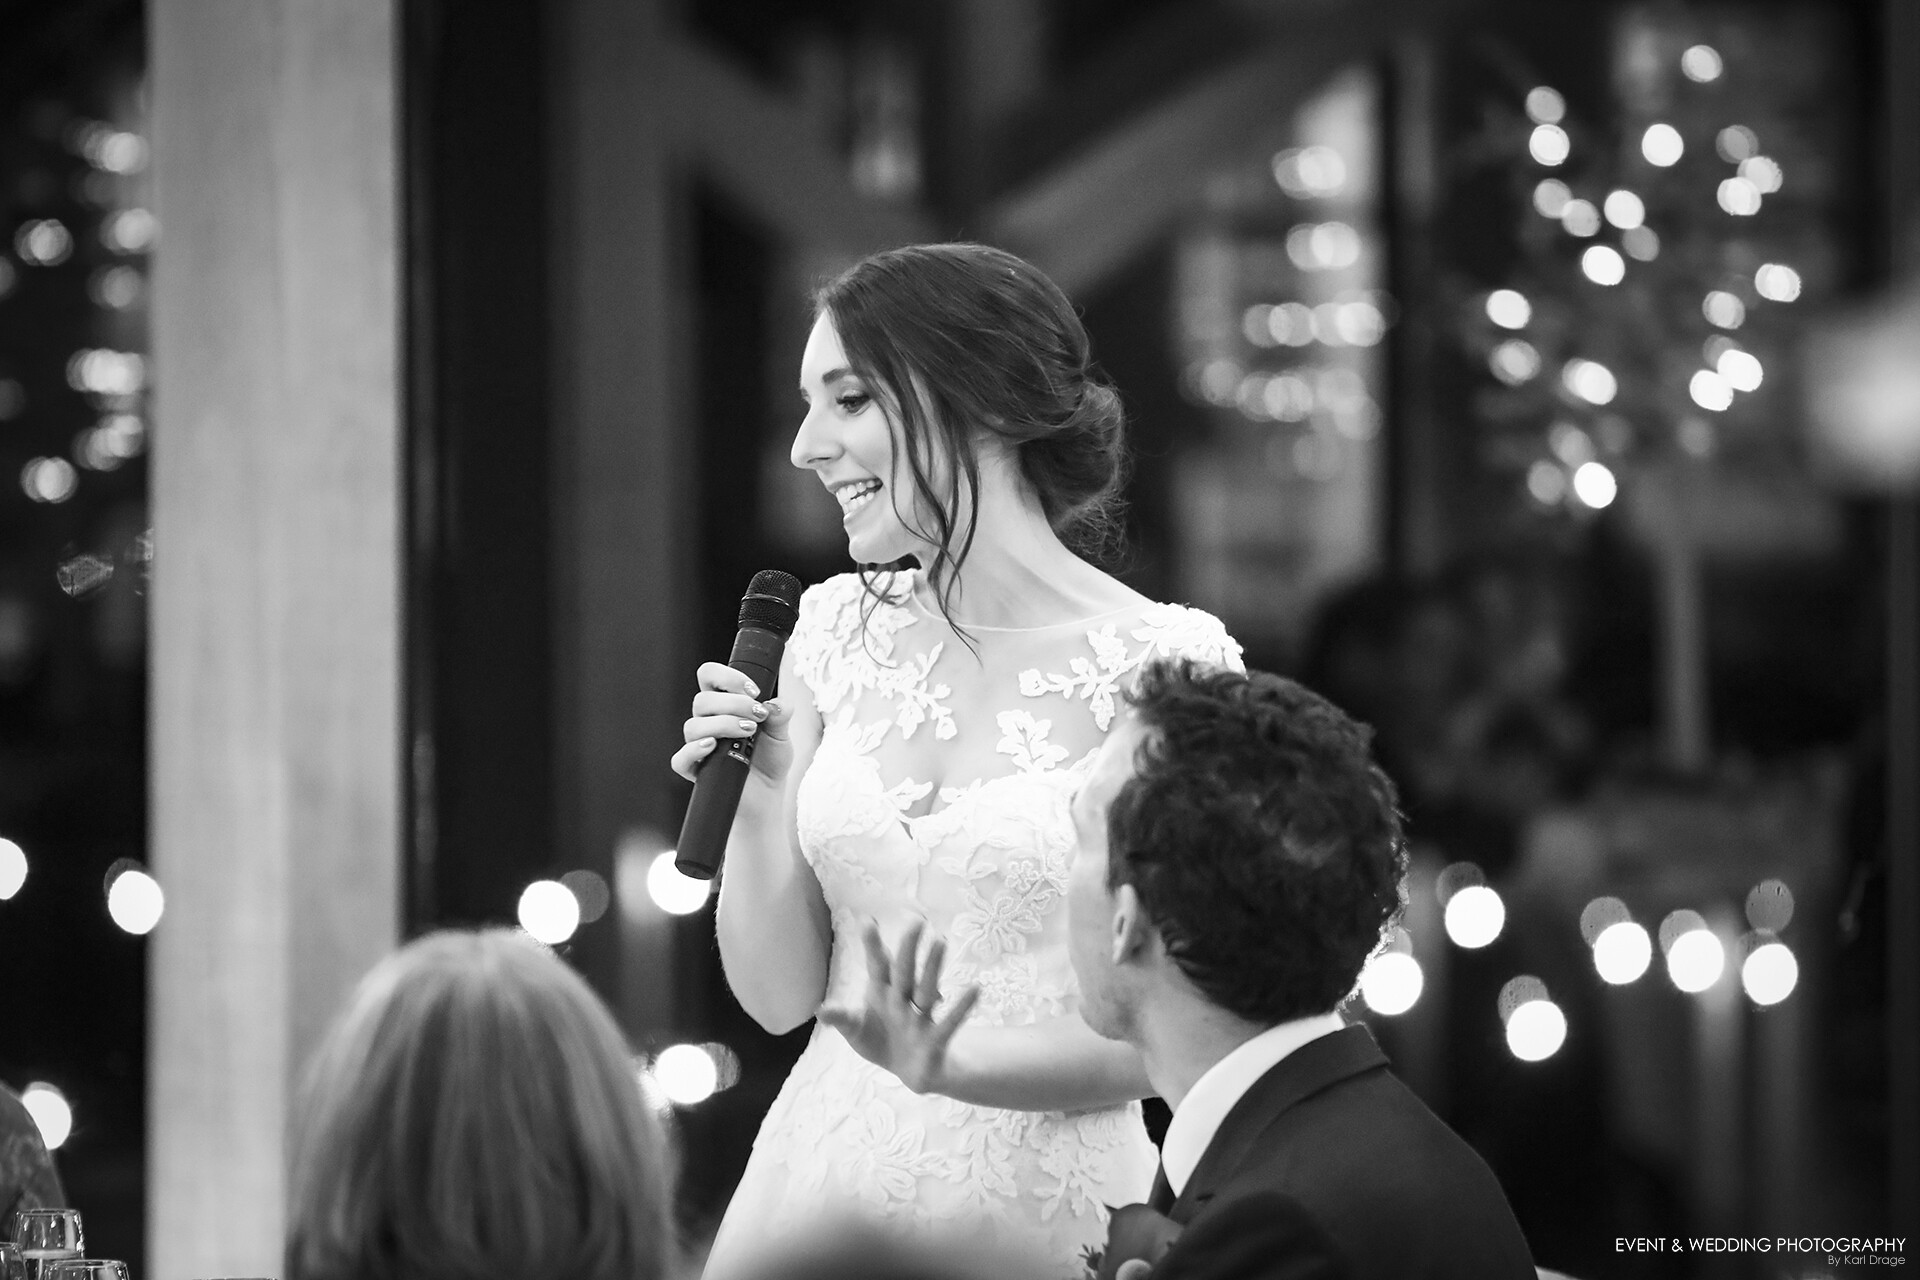 The Bride makes a speech at her wedding